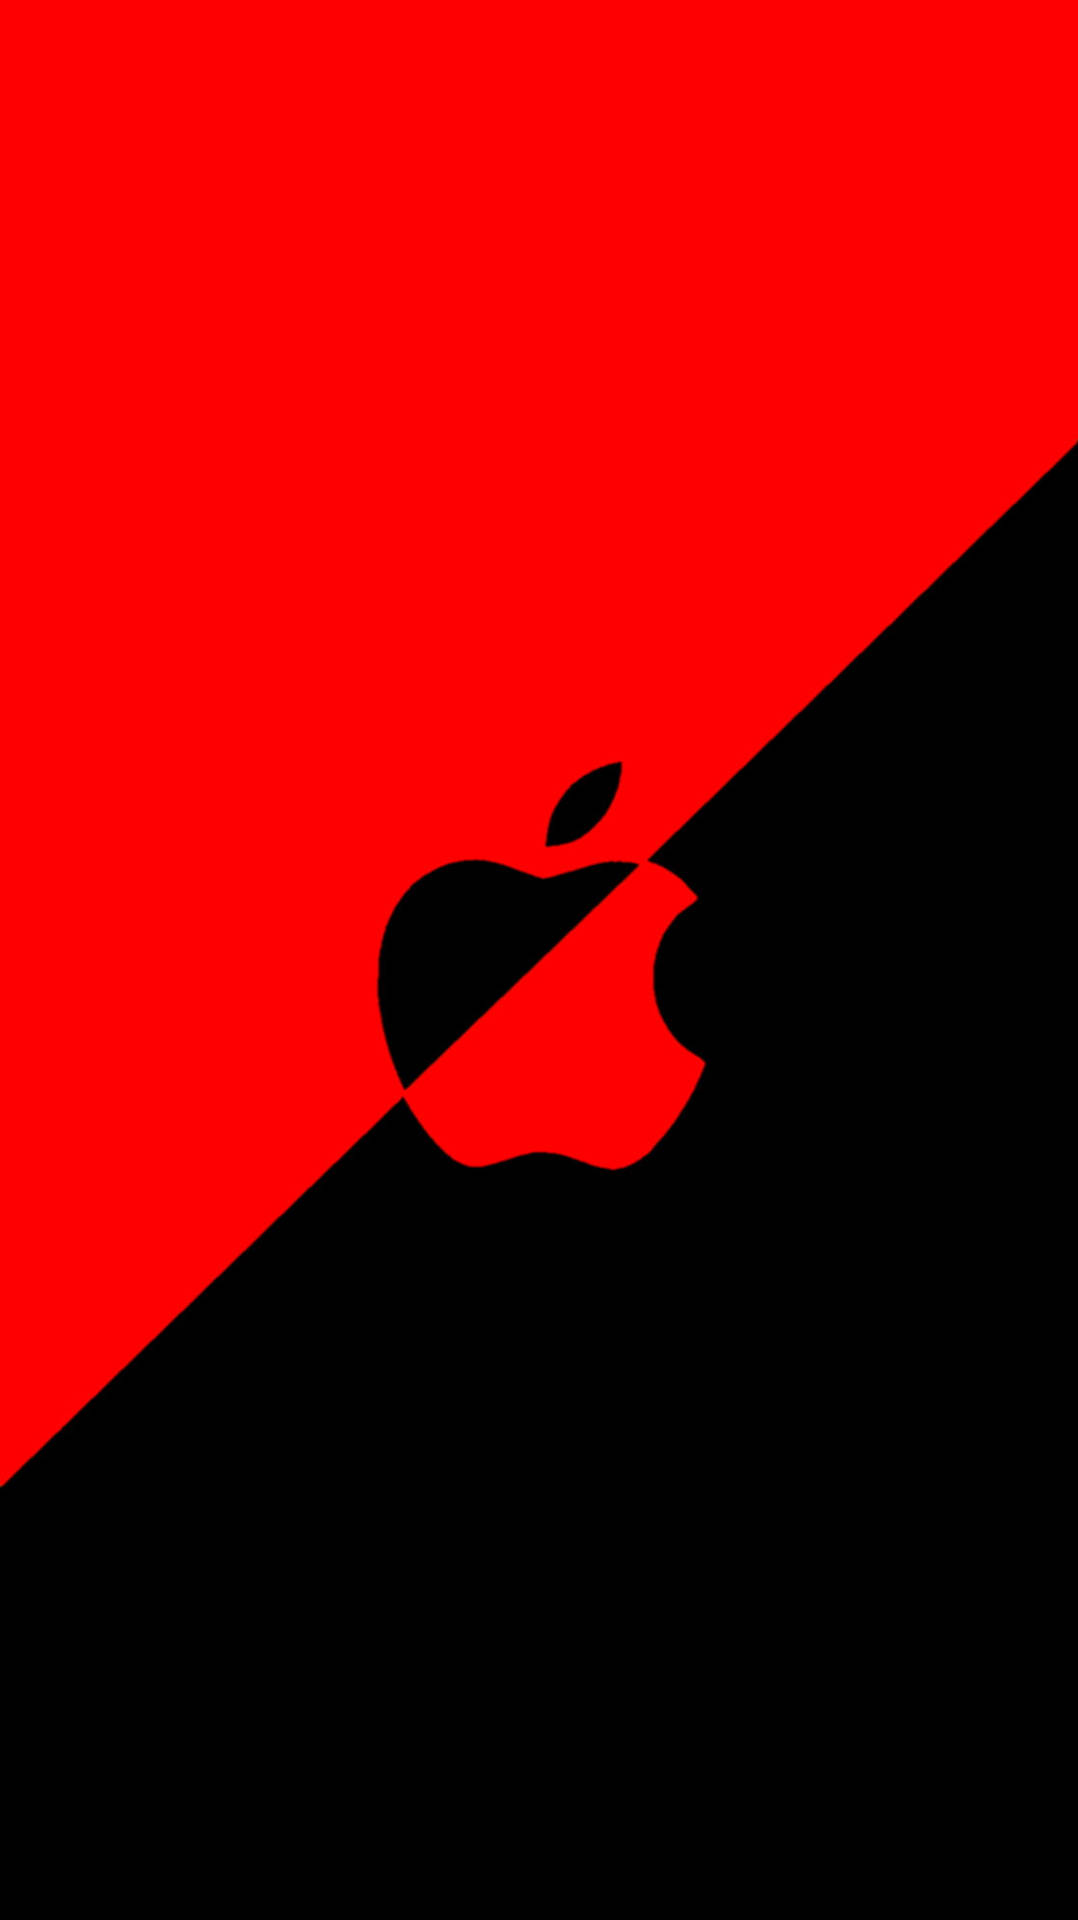 Red And Black Apple Logo Iphone Background